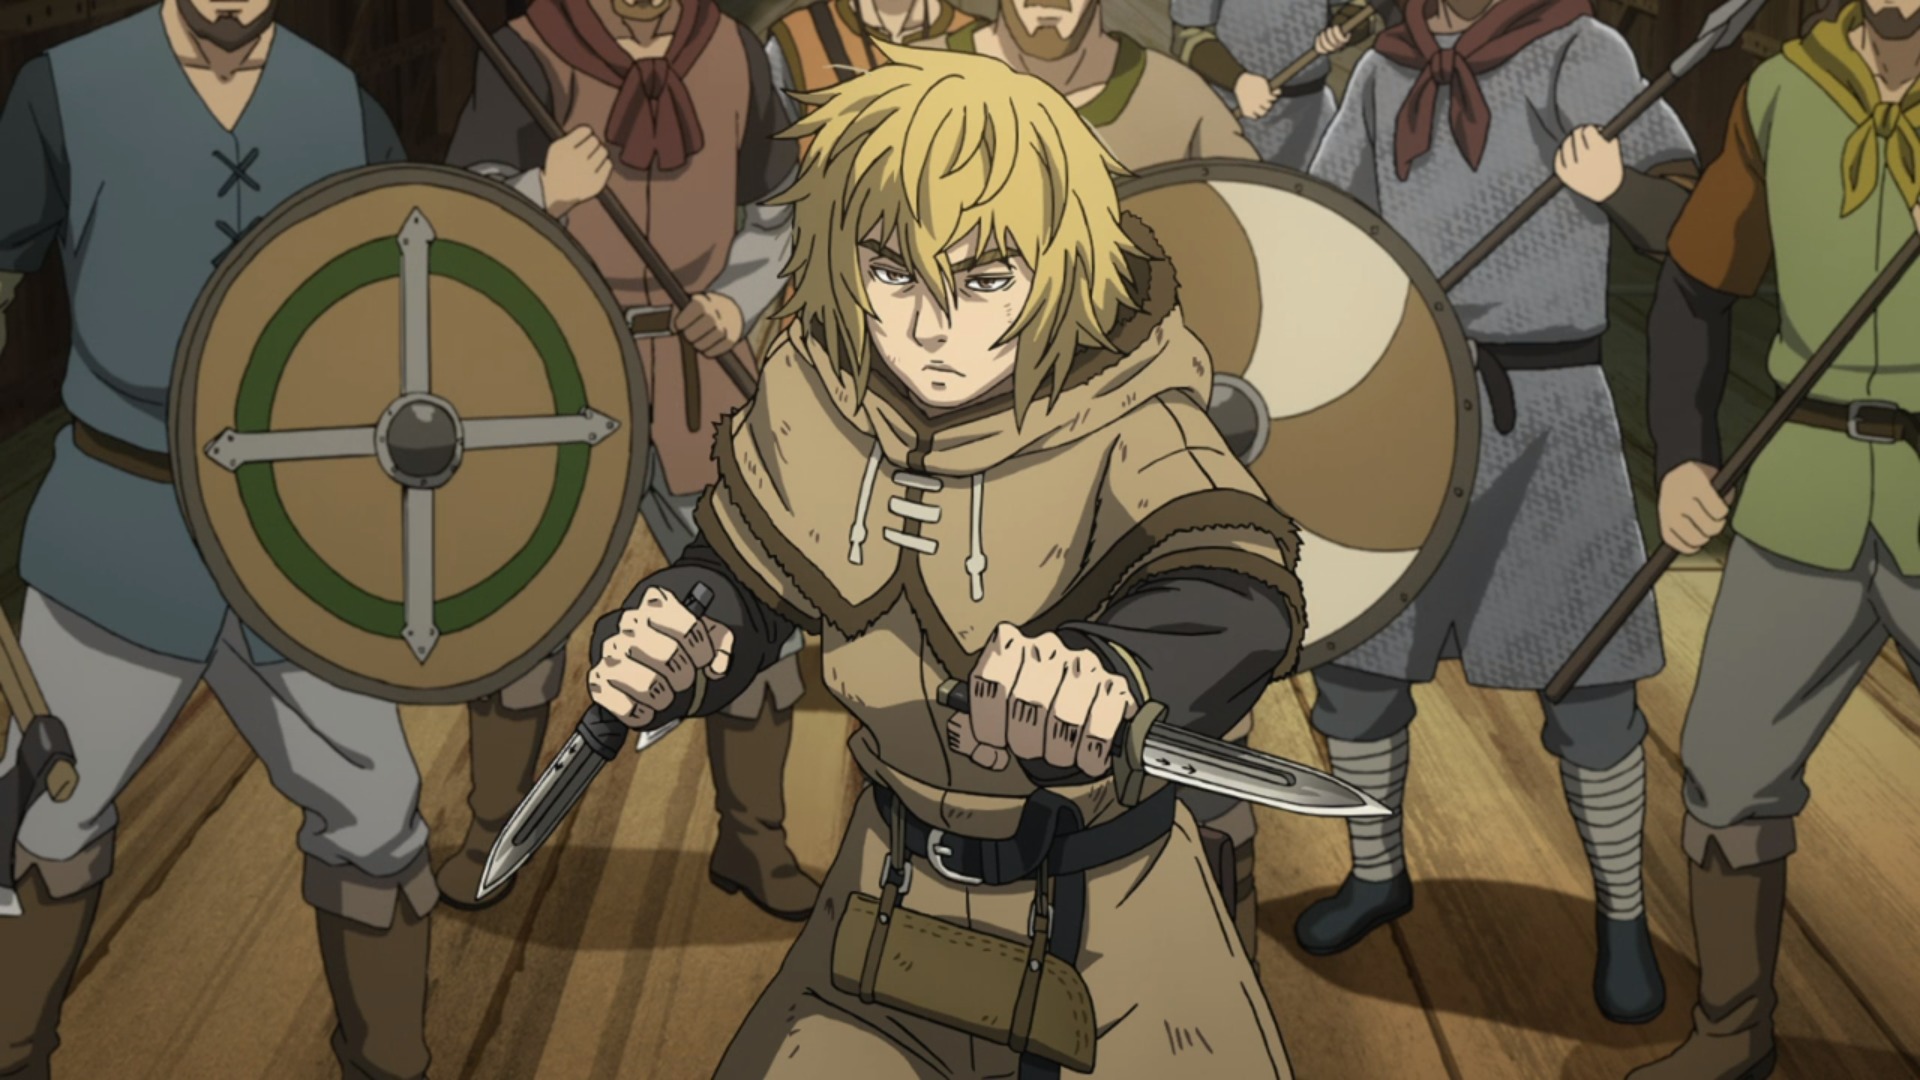 A still from the Vinland Saga anime with Thorfinn holding short swords on a boat